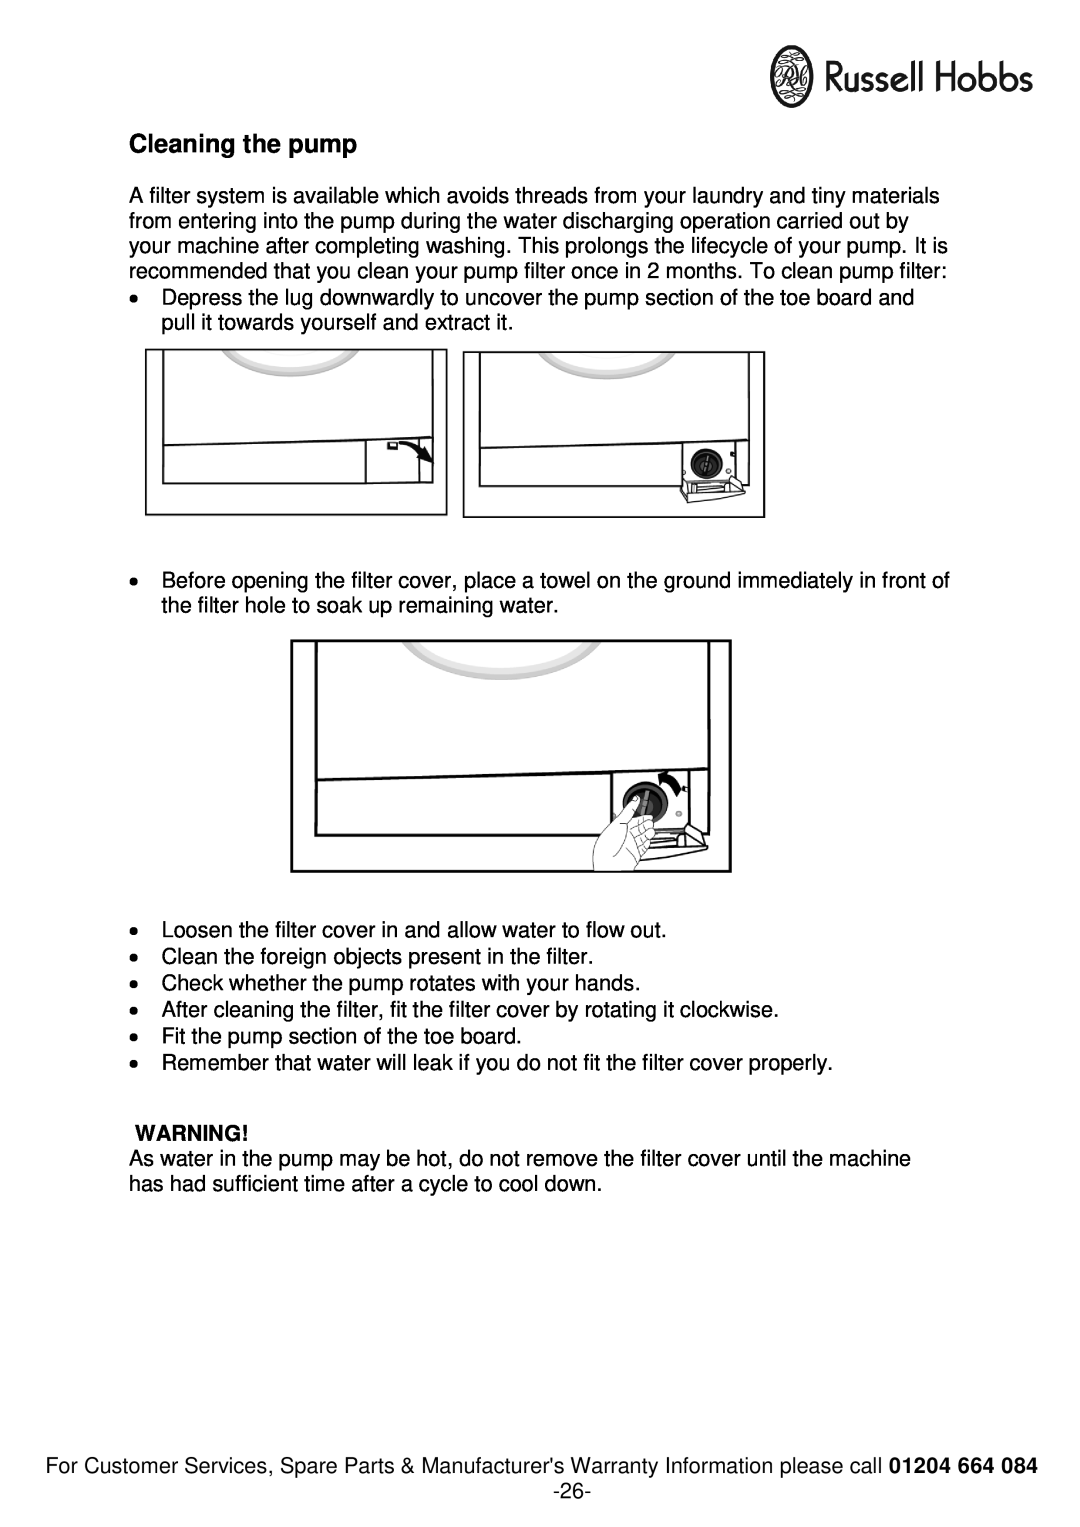 Russell Hobbs RH1261TW instruction manual Cleaning the pump 